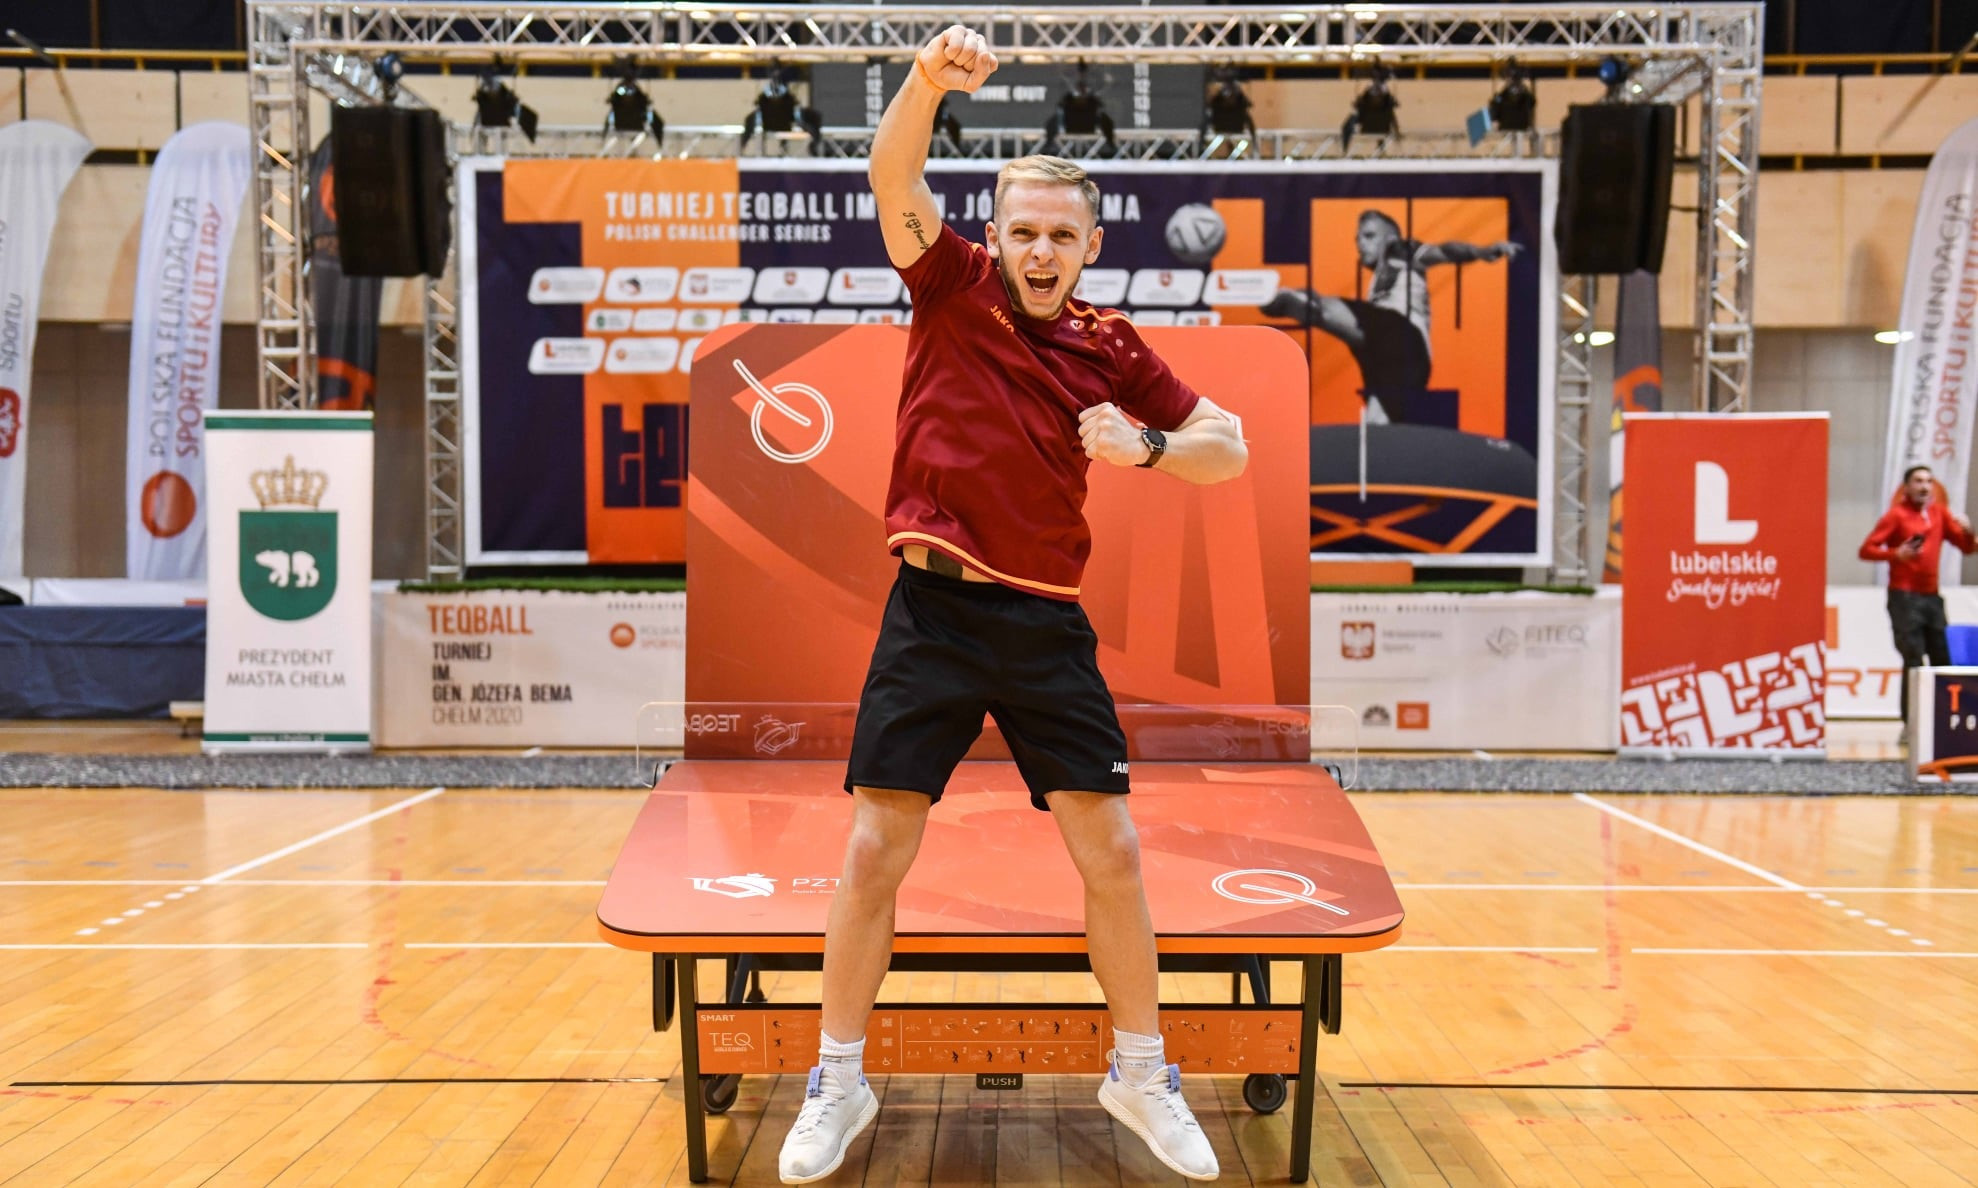 Poland's Duszak secures place at Teqball World Championships with national title